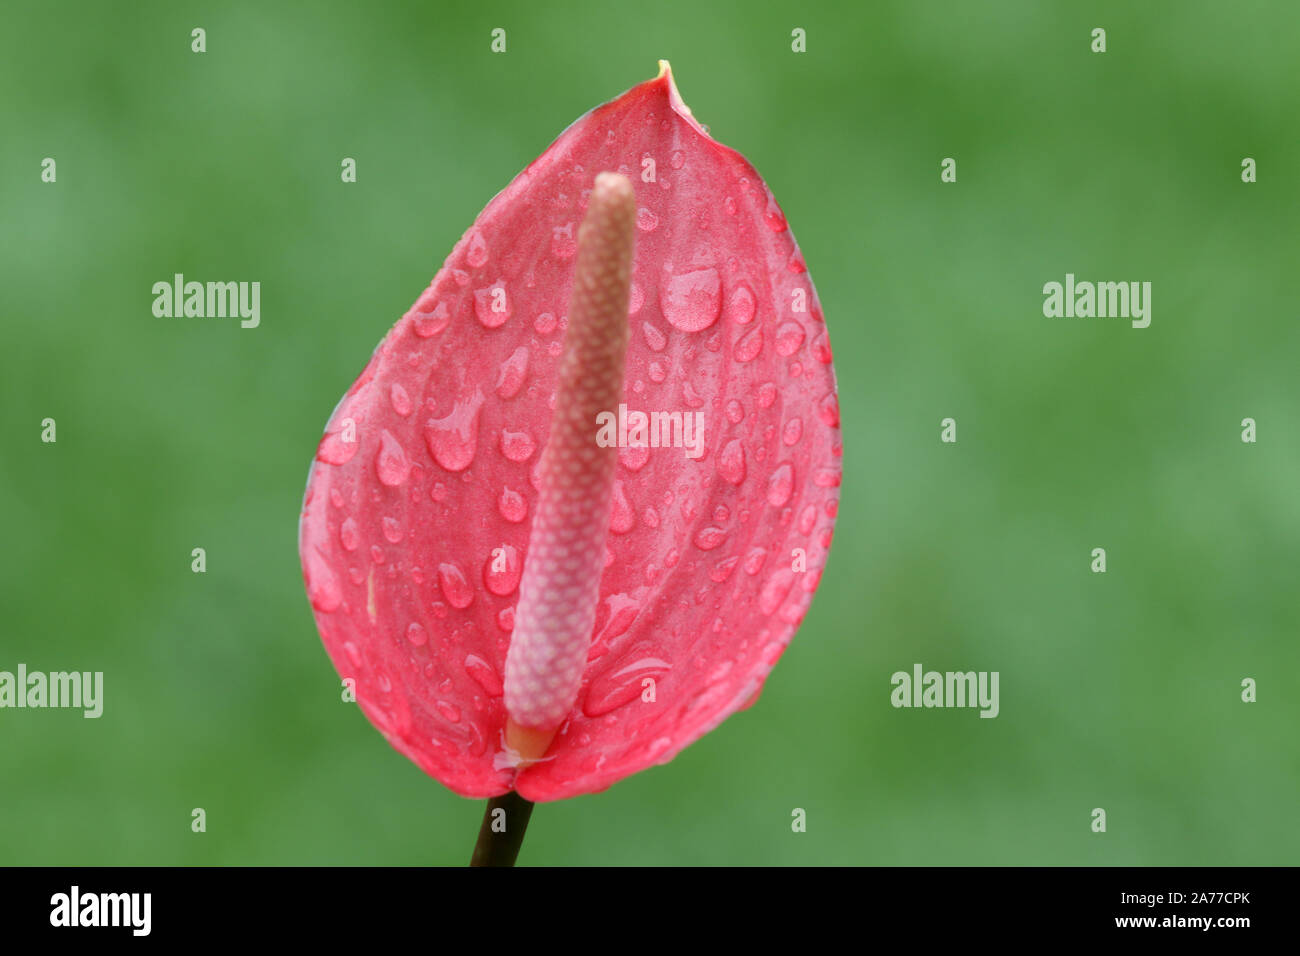 Close up of a beautiful Laceleaf or Anthurium flower with rain drops over a green background Stock Photo